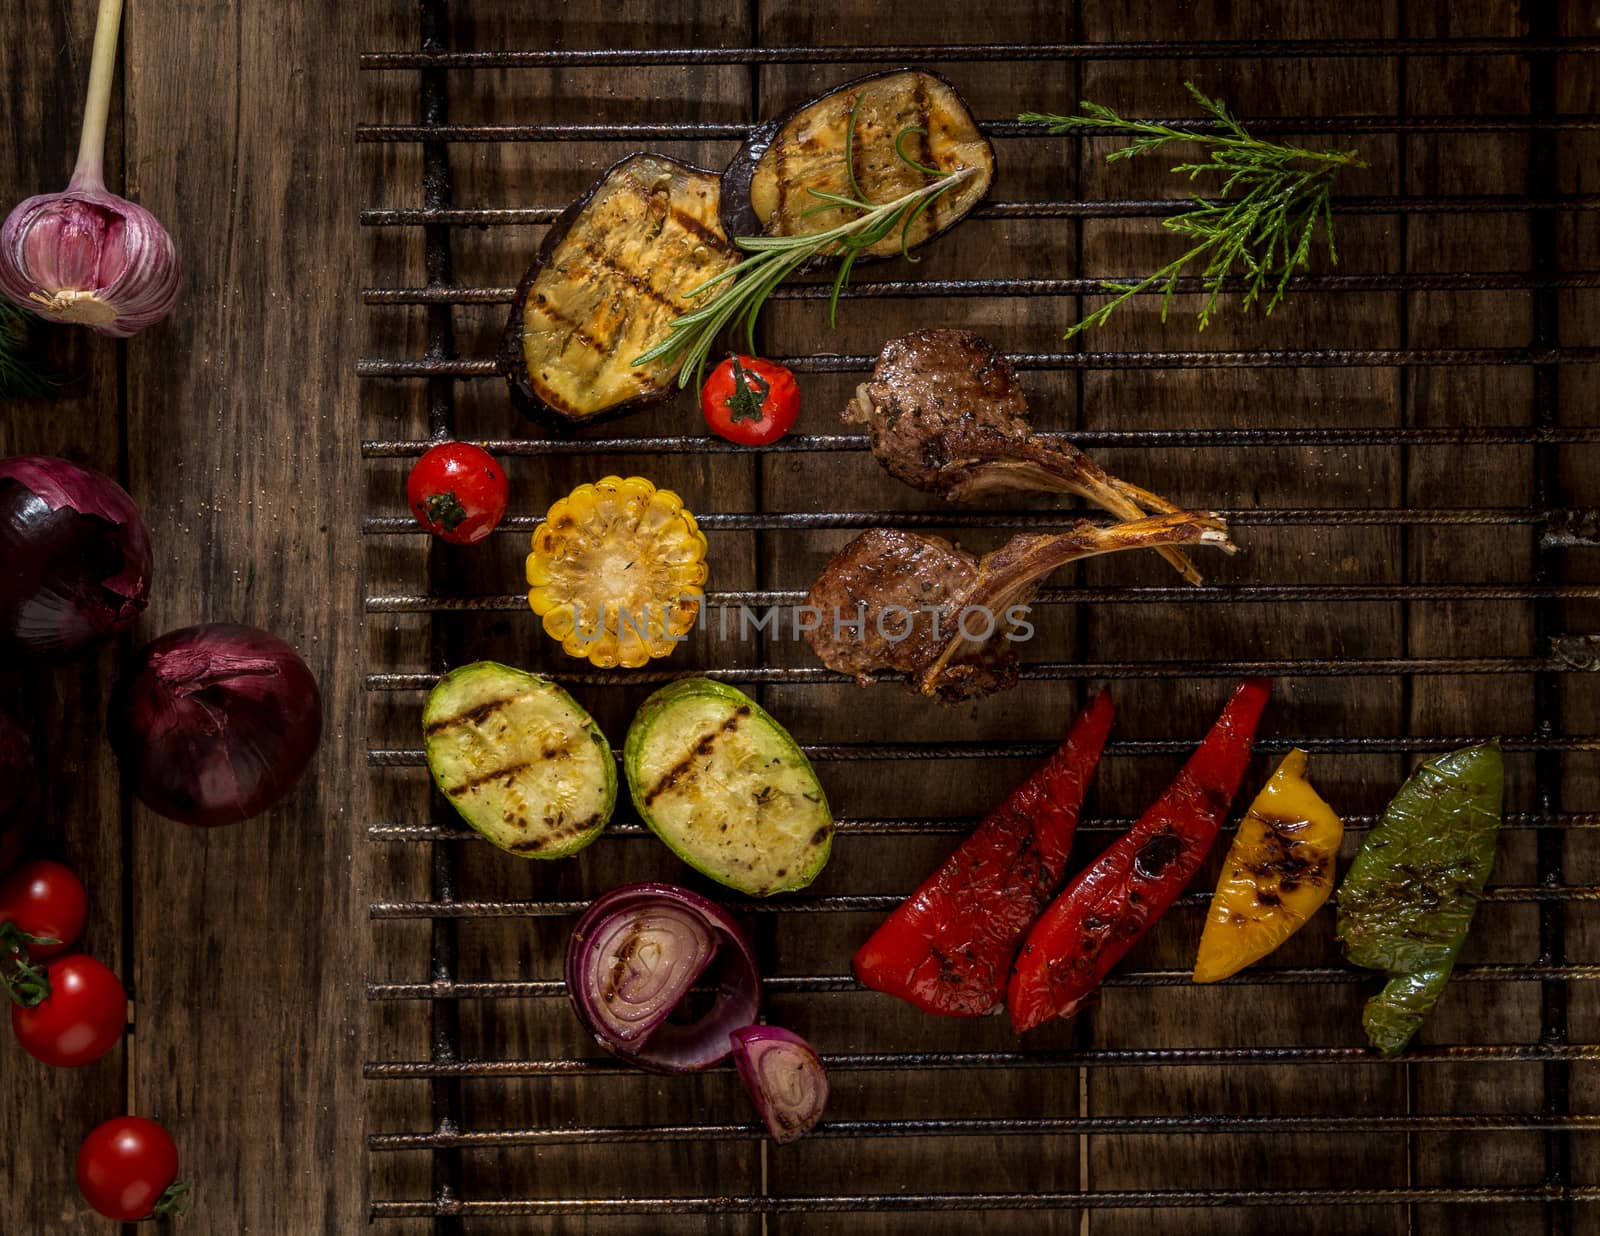 dish on a wooden surface by A_Karim